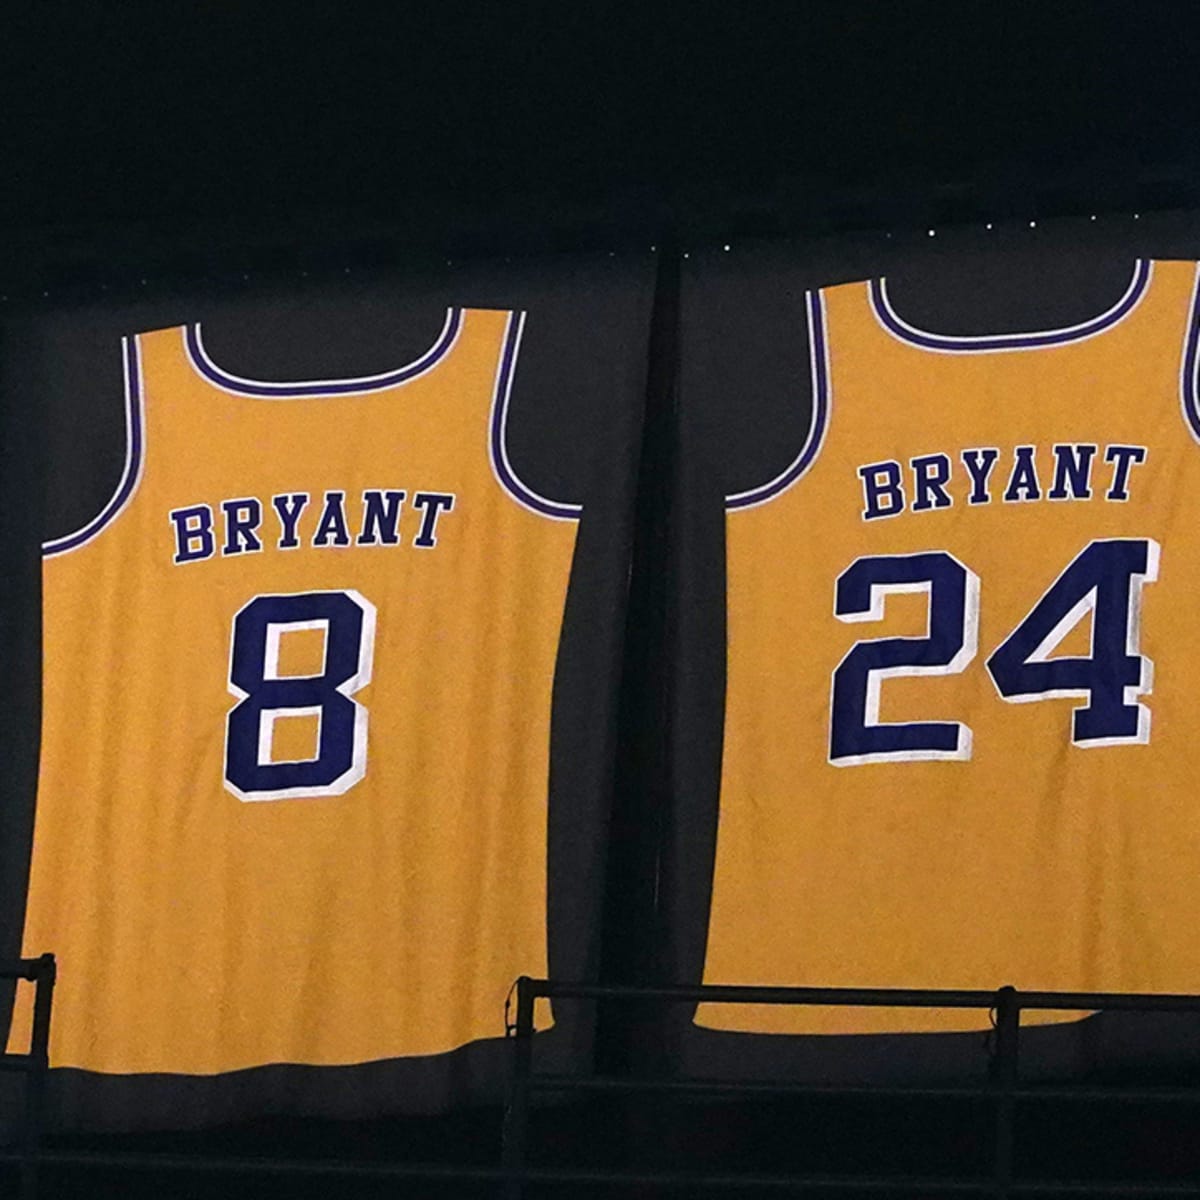 Kobe Bryant auction features one-of-a-kind high school jersey of